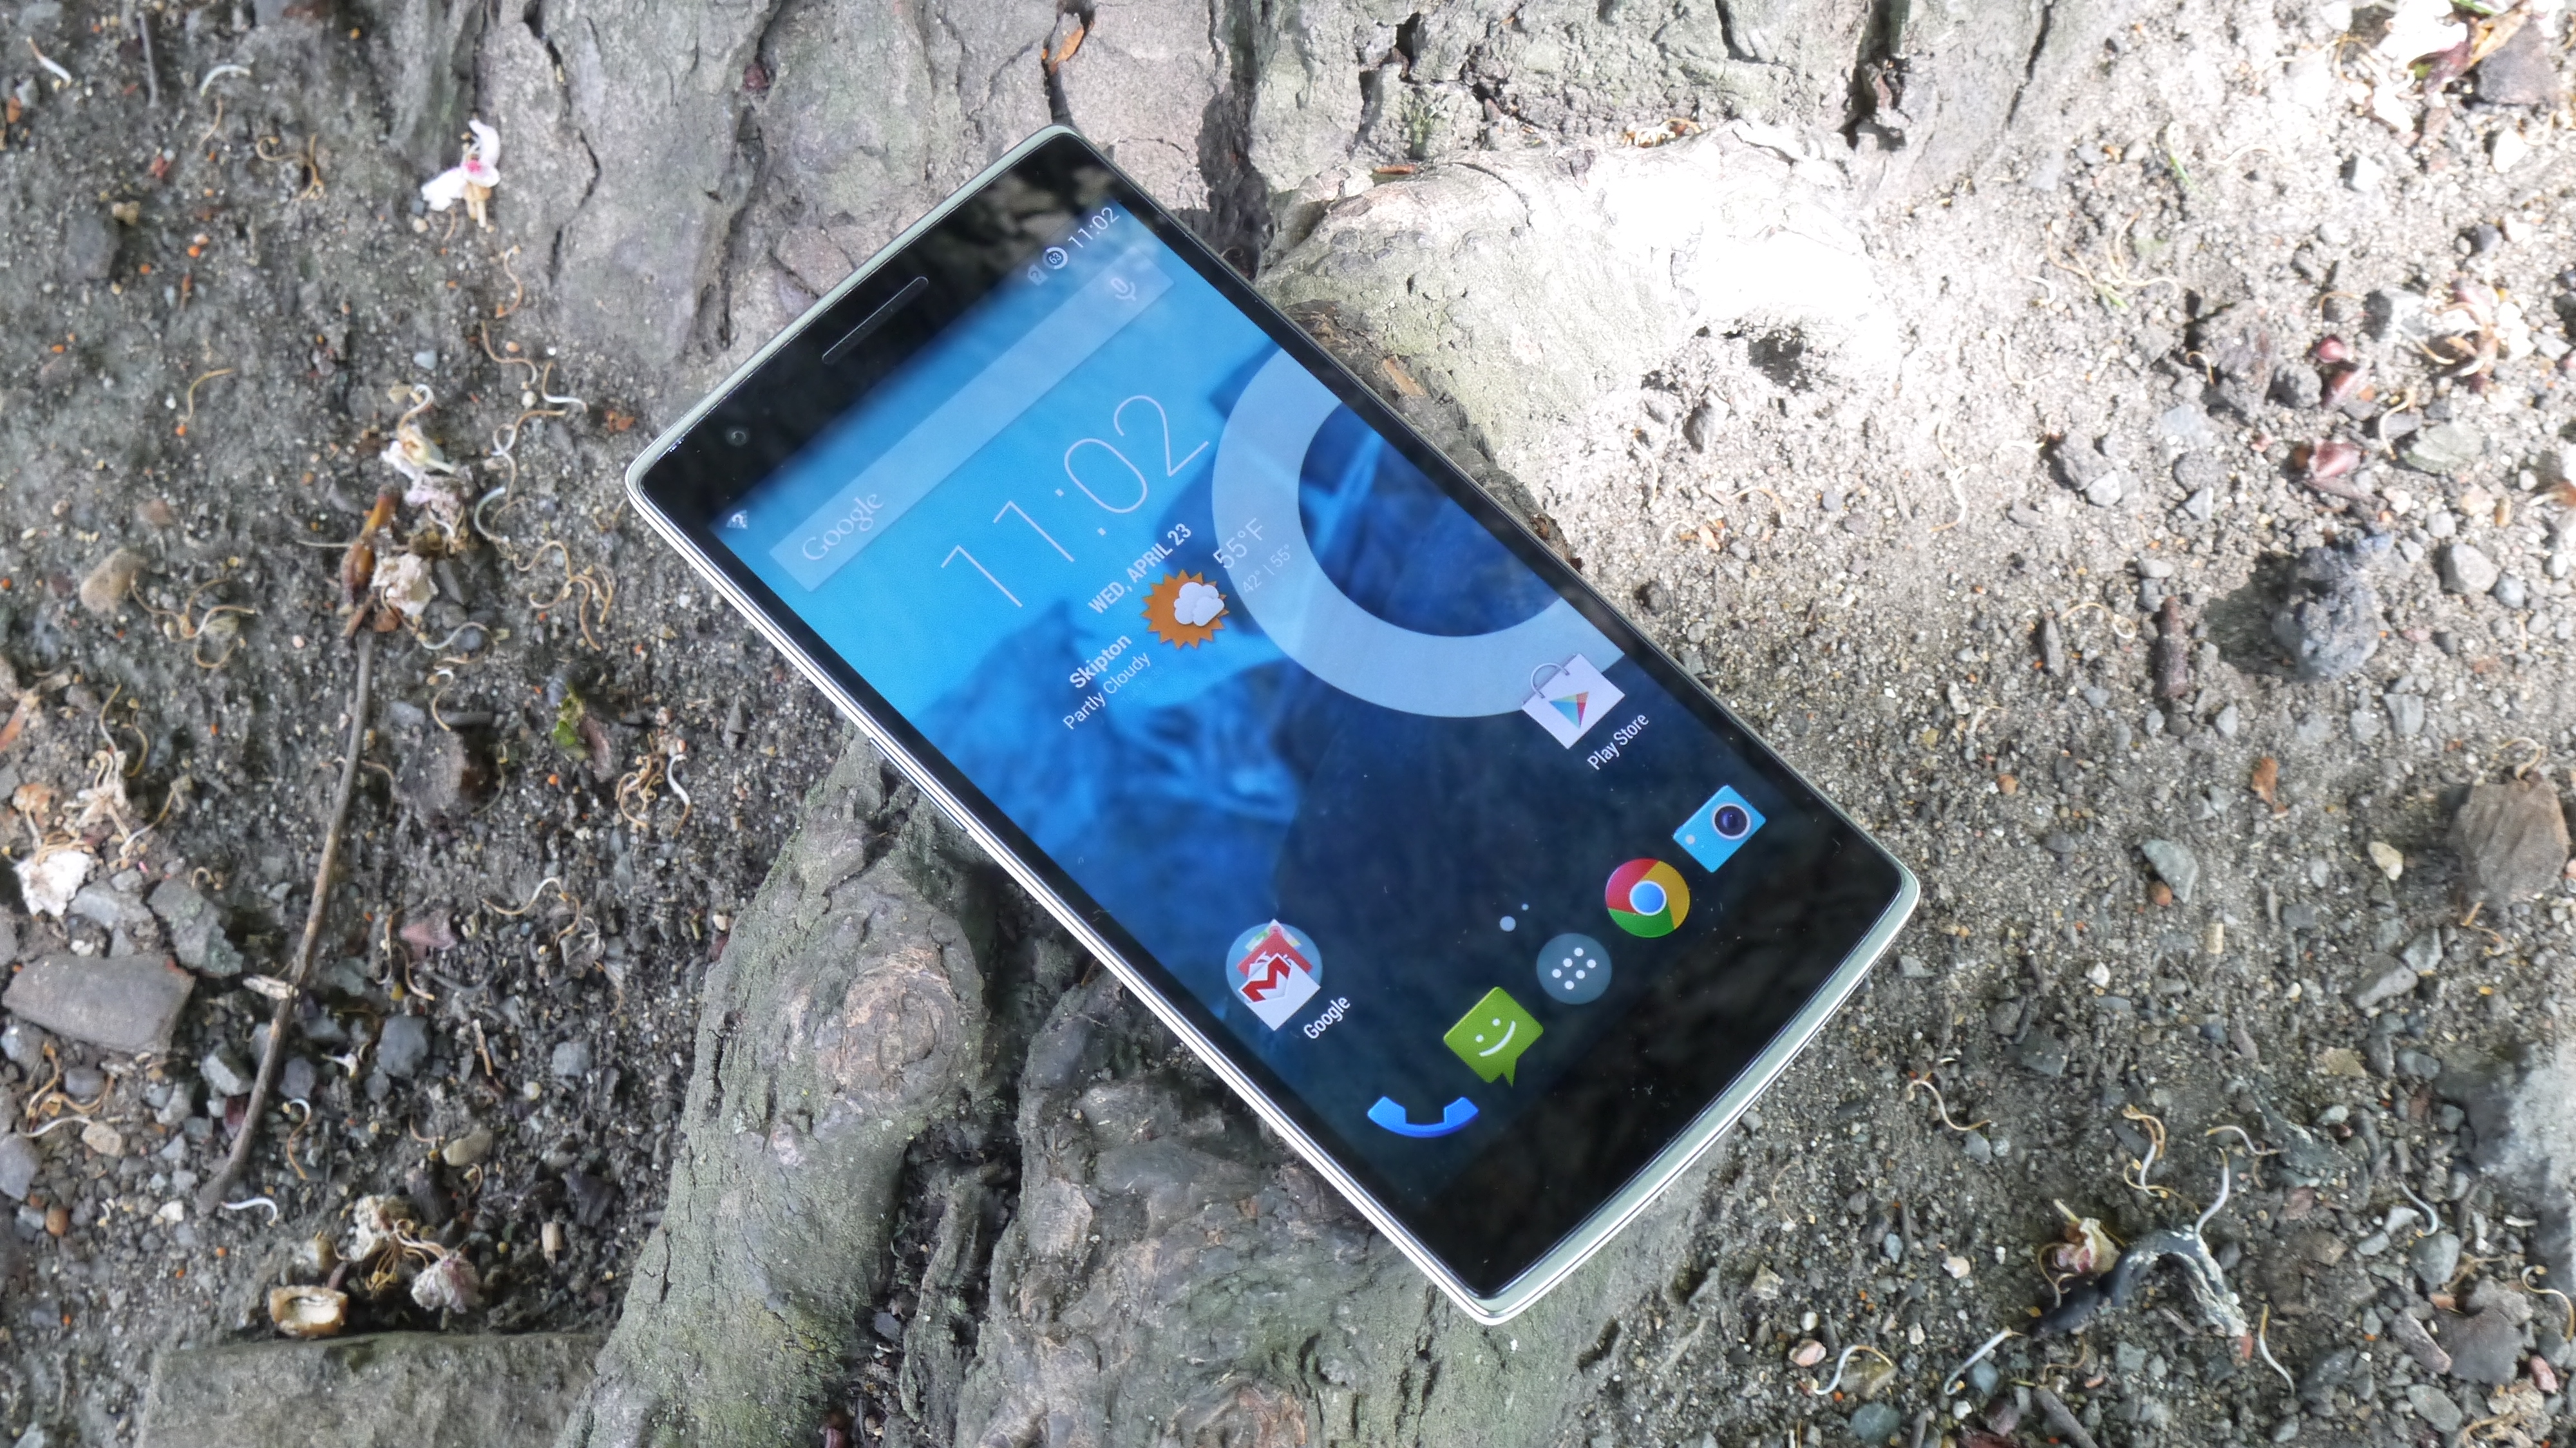 The OnePlus One resting on a rock